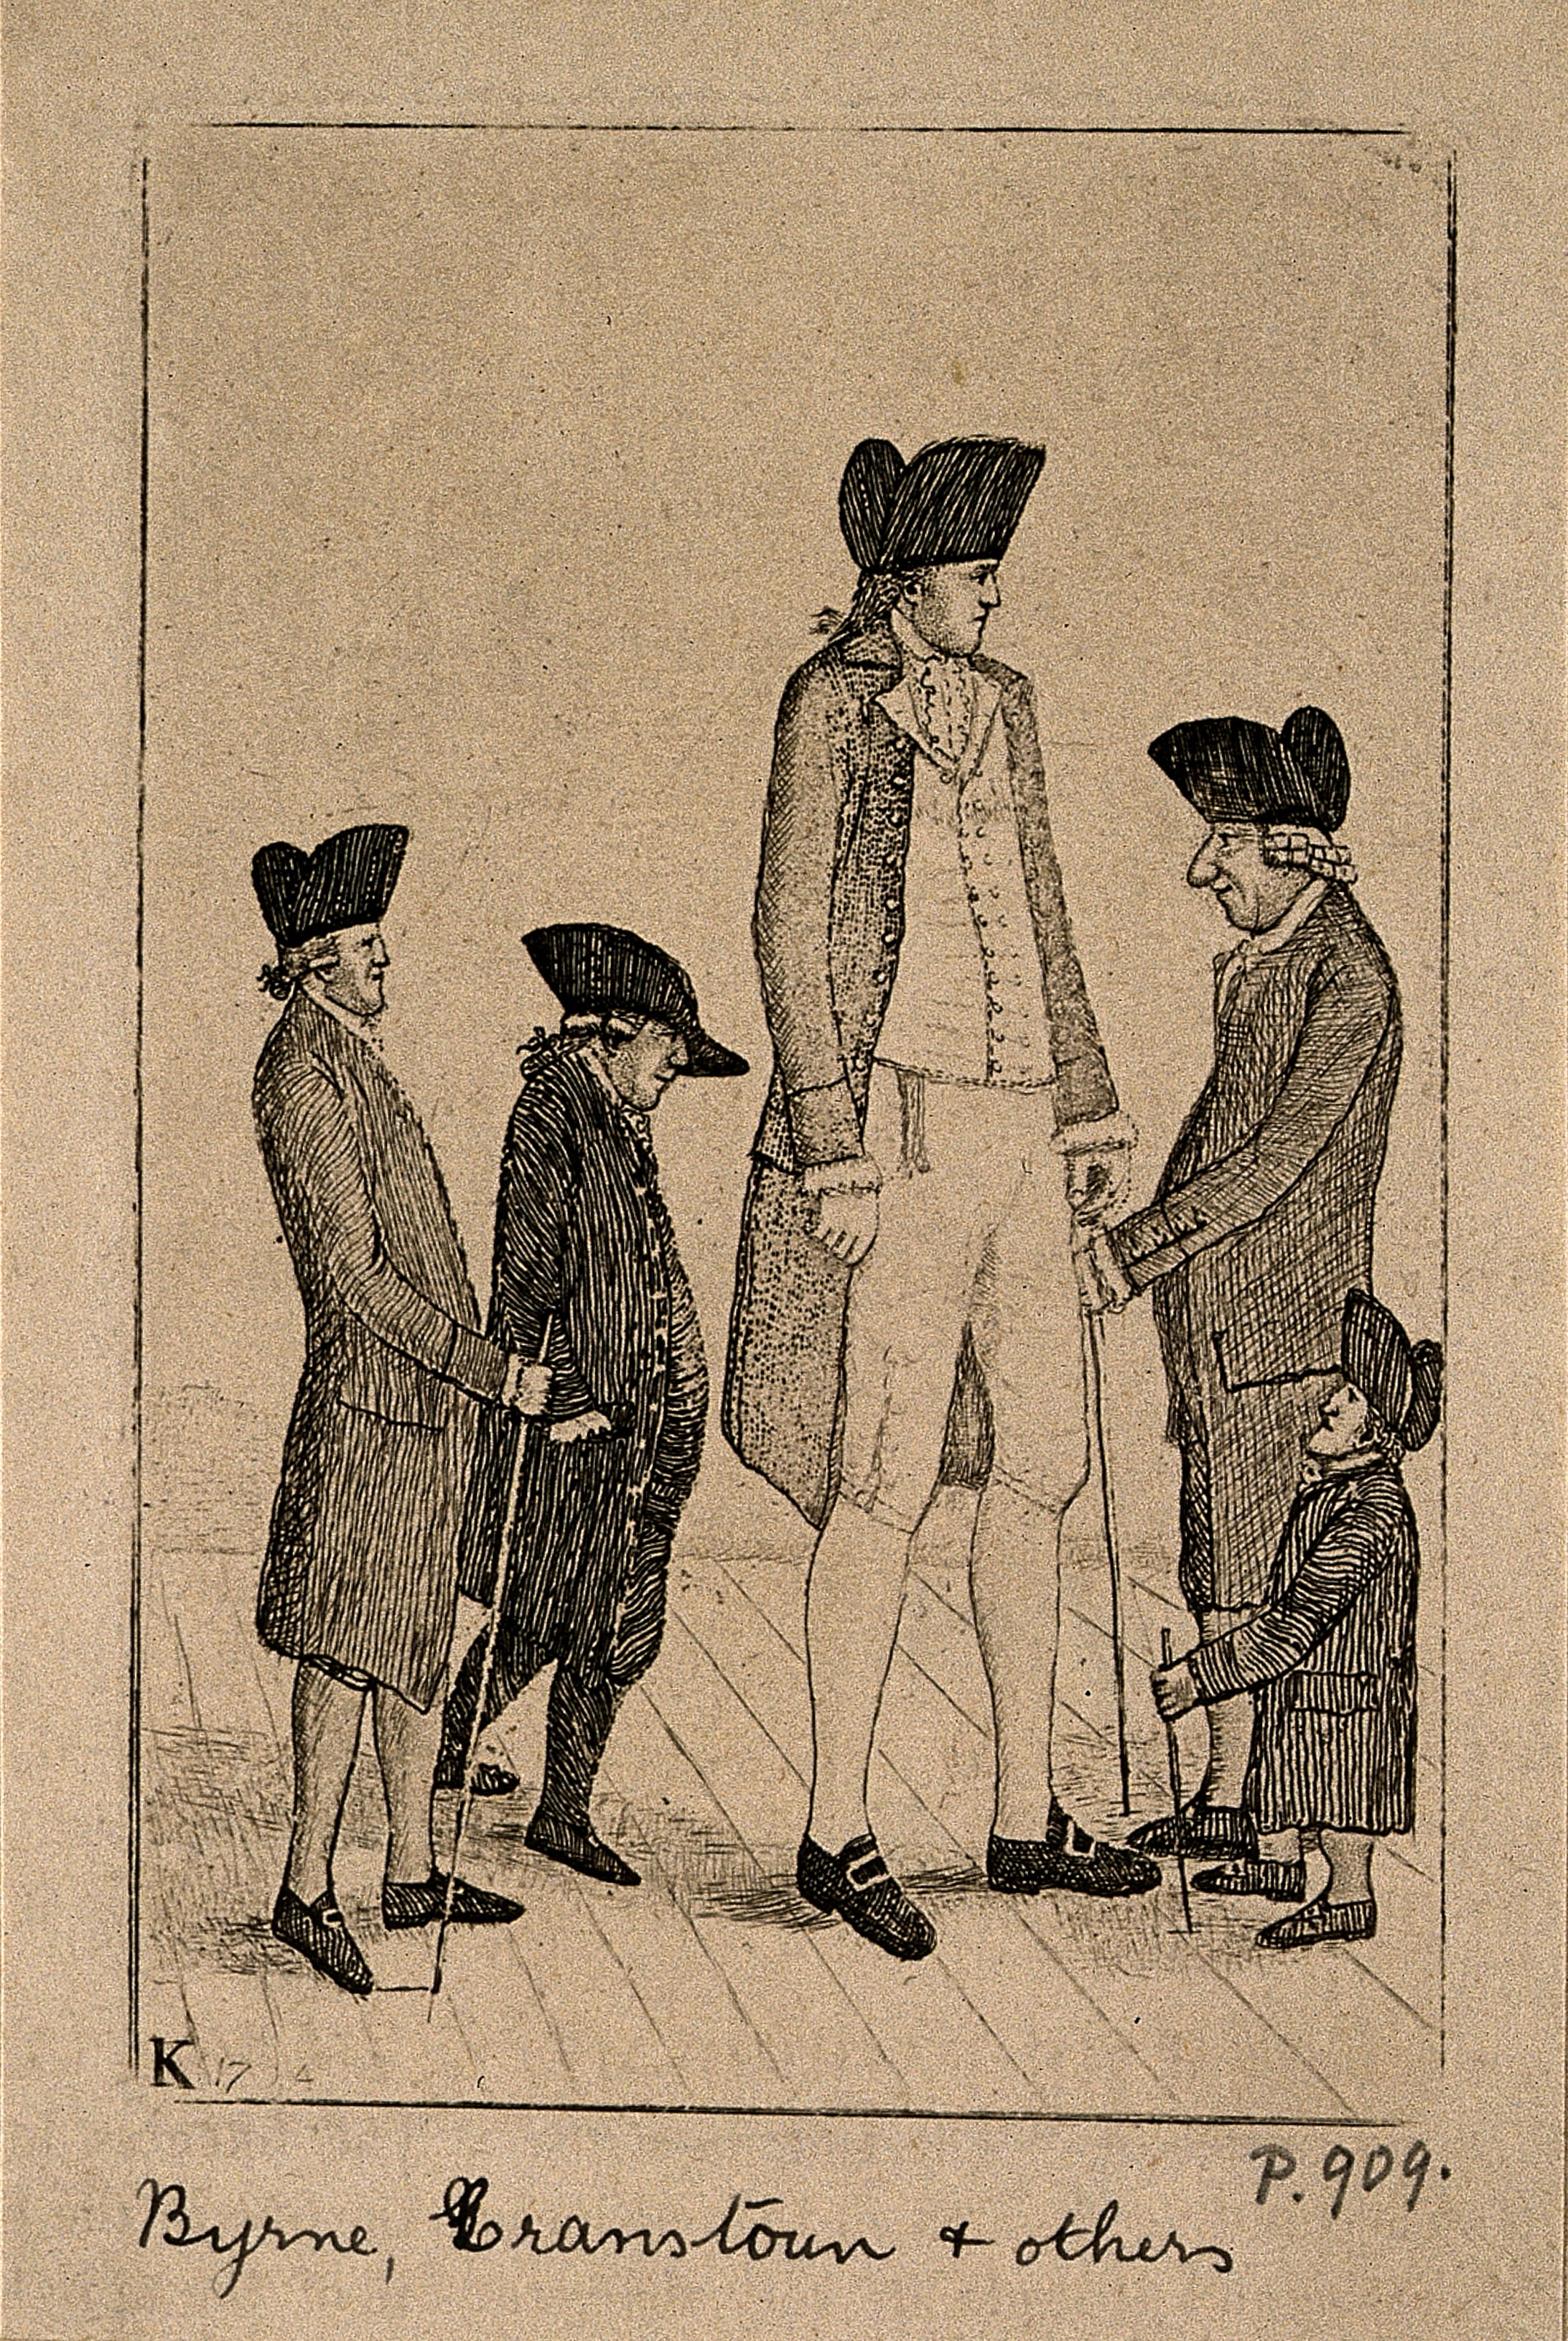 
Byrne, third from right, with George Cranstoun - a dwarf, and three other men [Wellcome Images]
